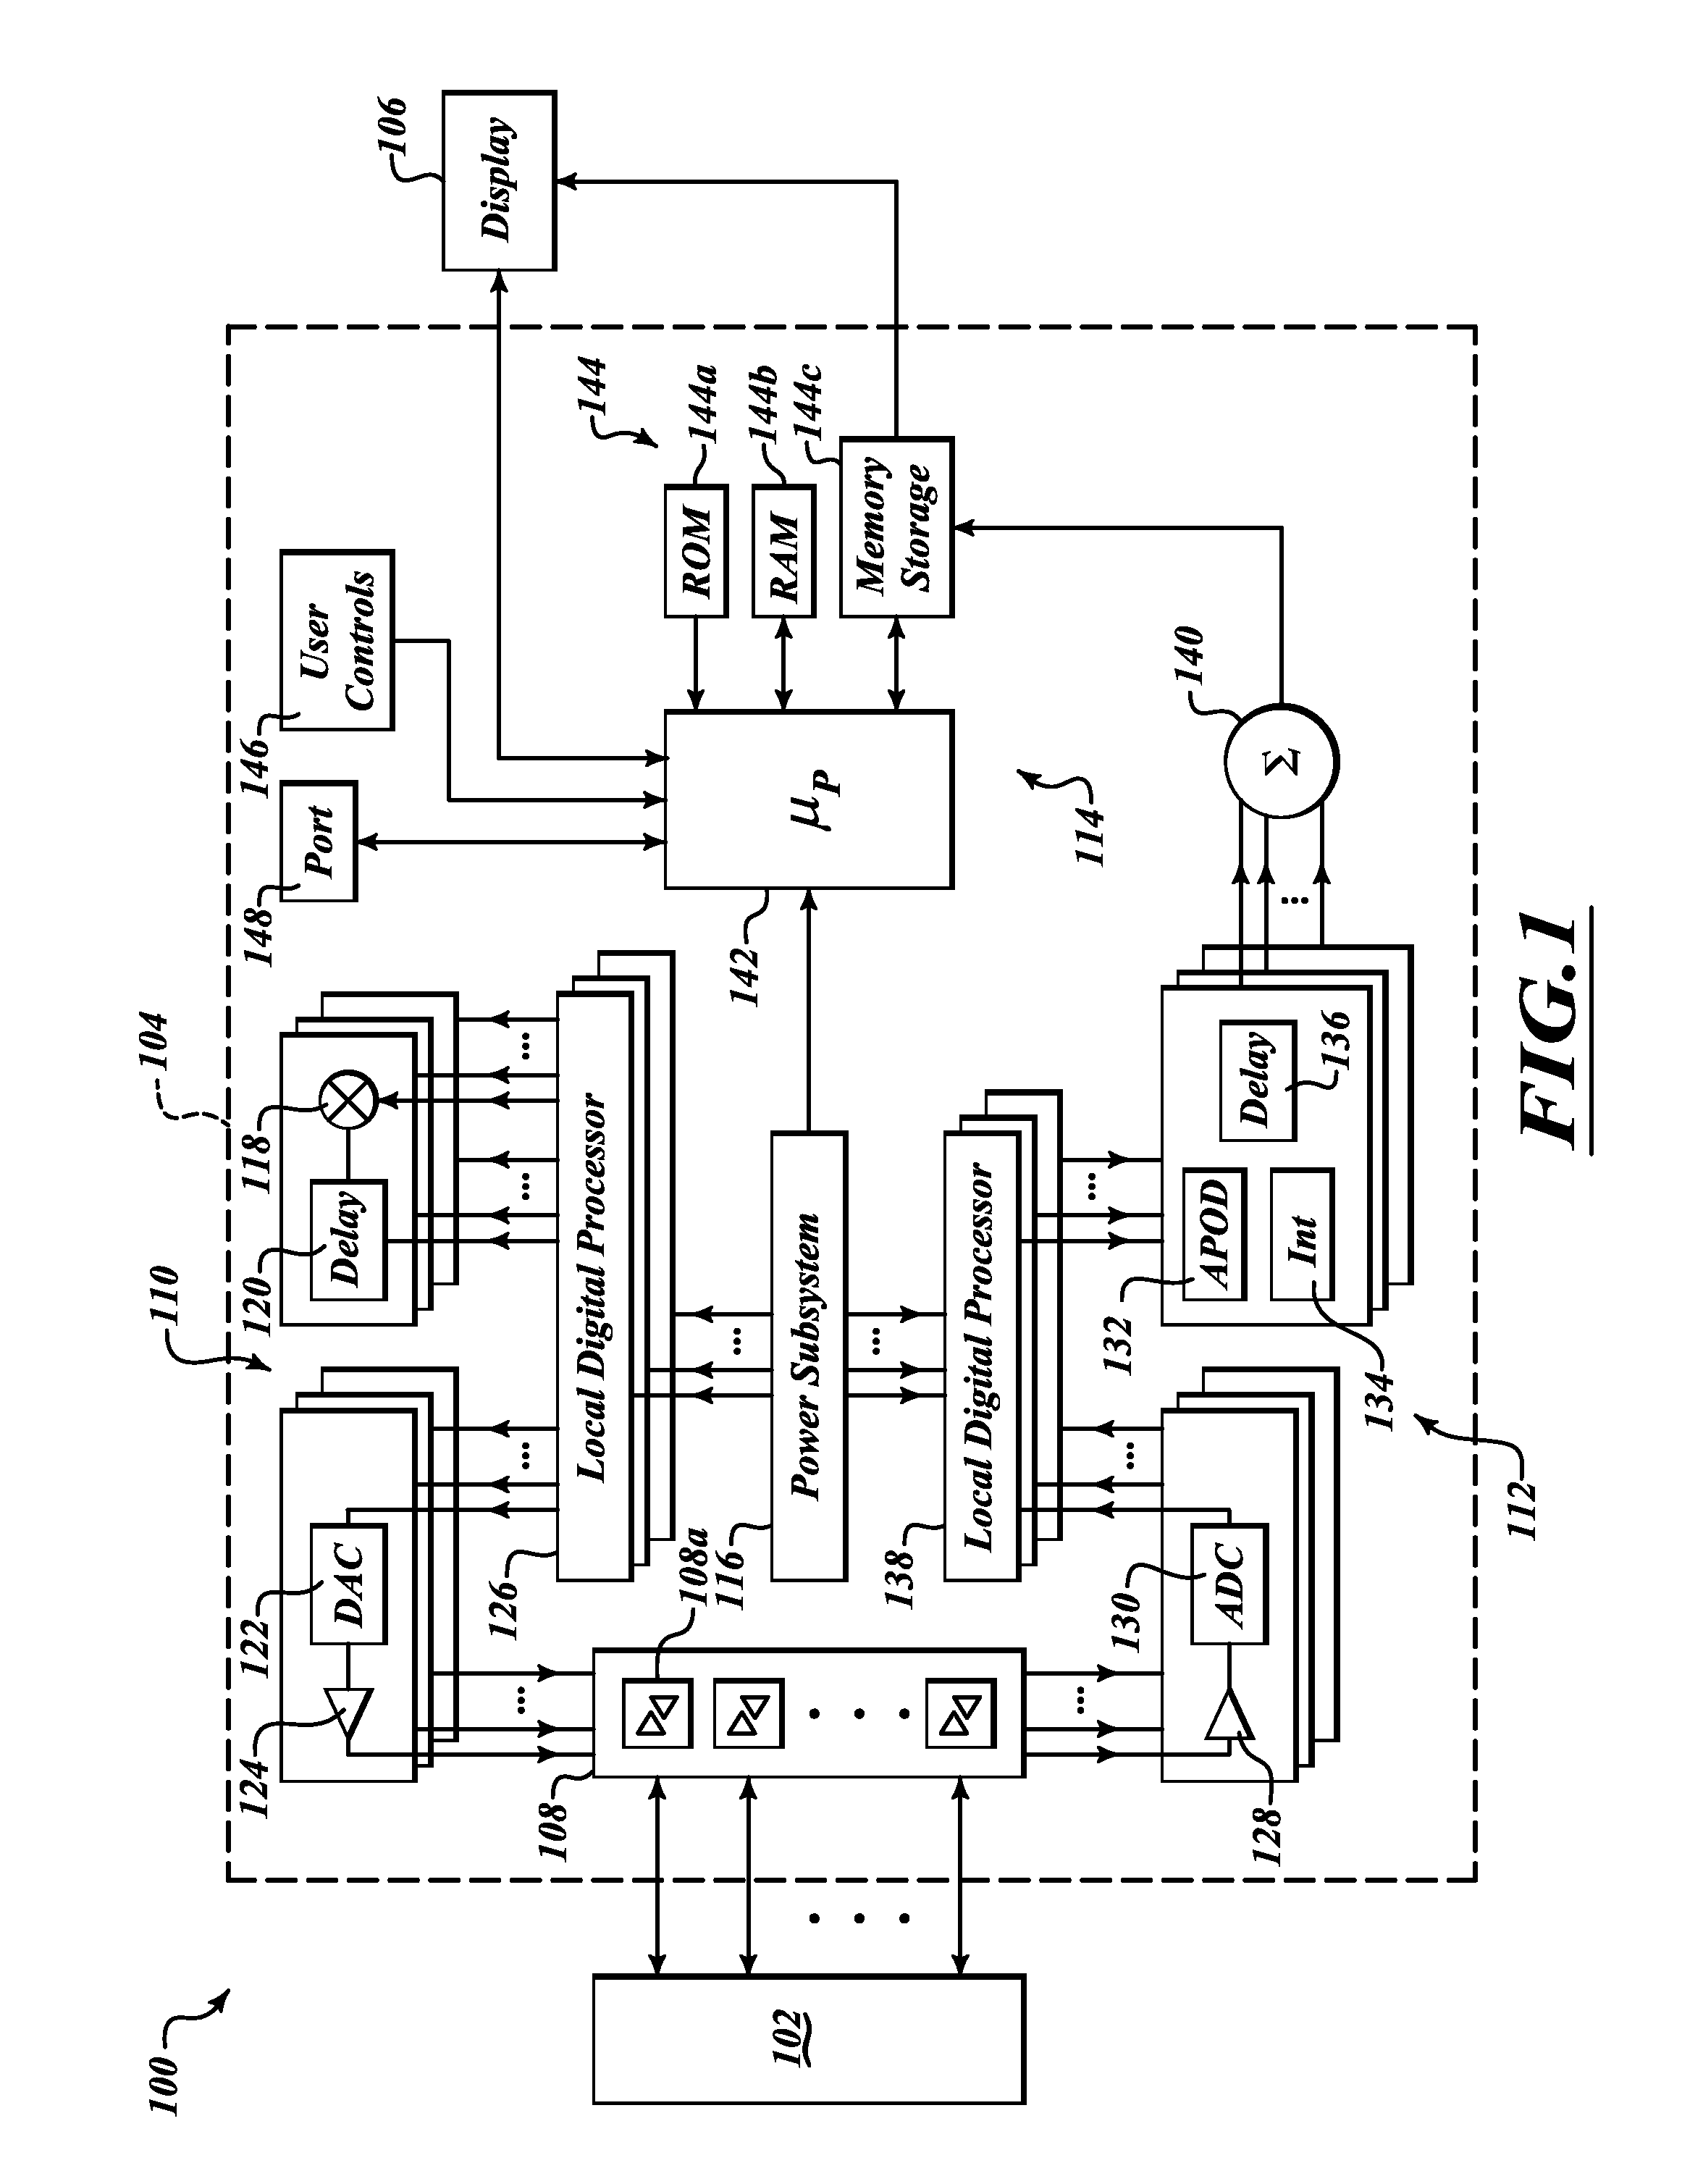 Ultrasound imaging system and method with automatic adjustment and/or multiple sample volumes